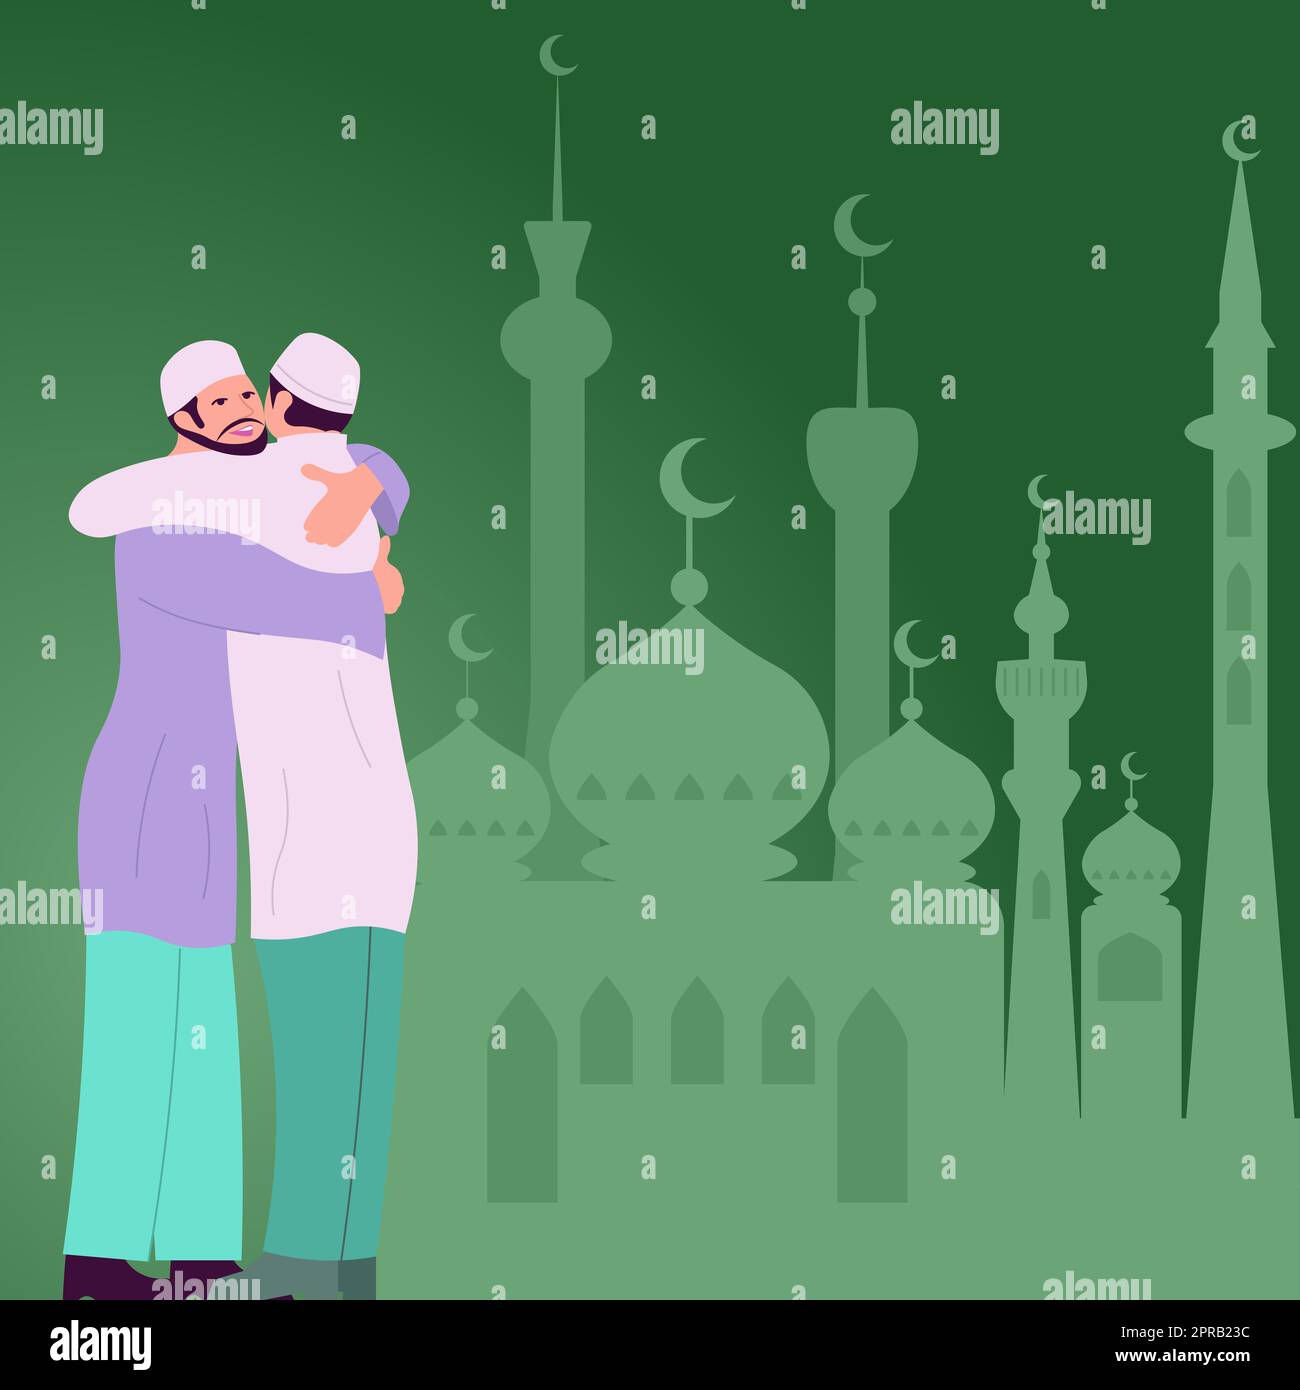 Friends Hugging In Front Of Mosque Celebrating Ramadan. Men In Traditional Clothes Standing At Holy Place. Two People Honoring Their God. Group Of Two Praying. Stock Photo